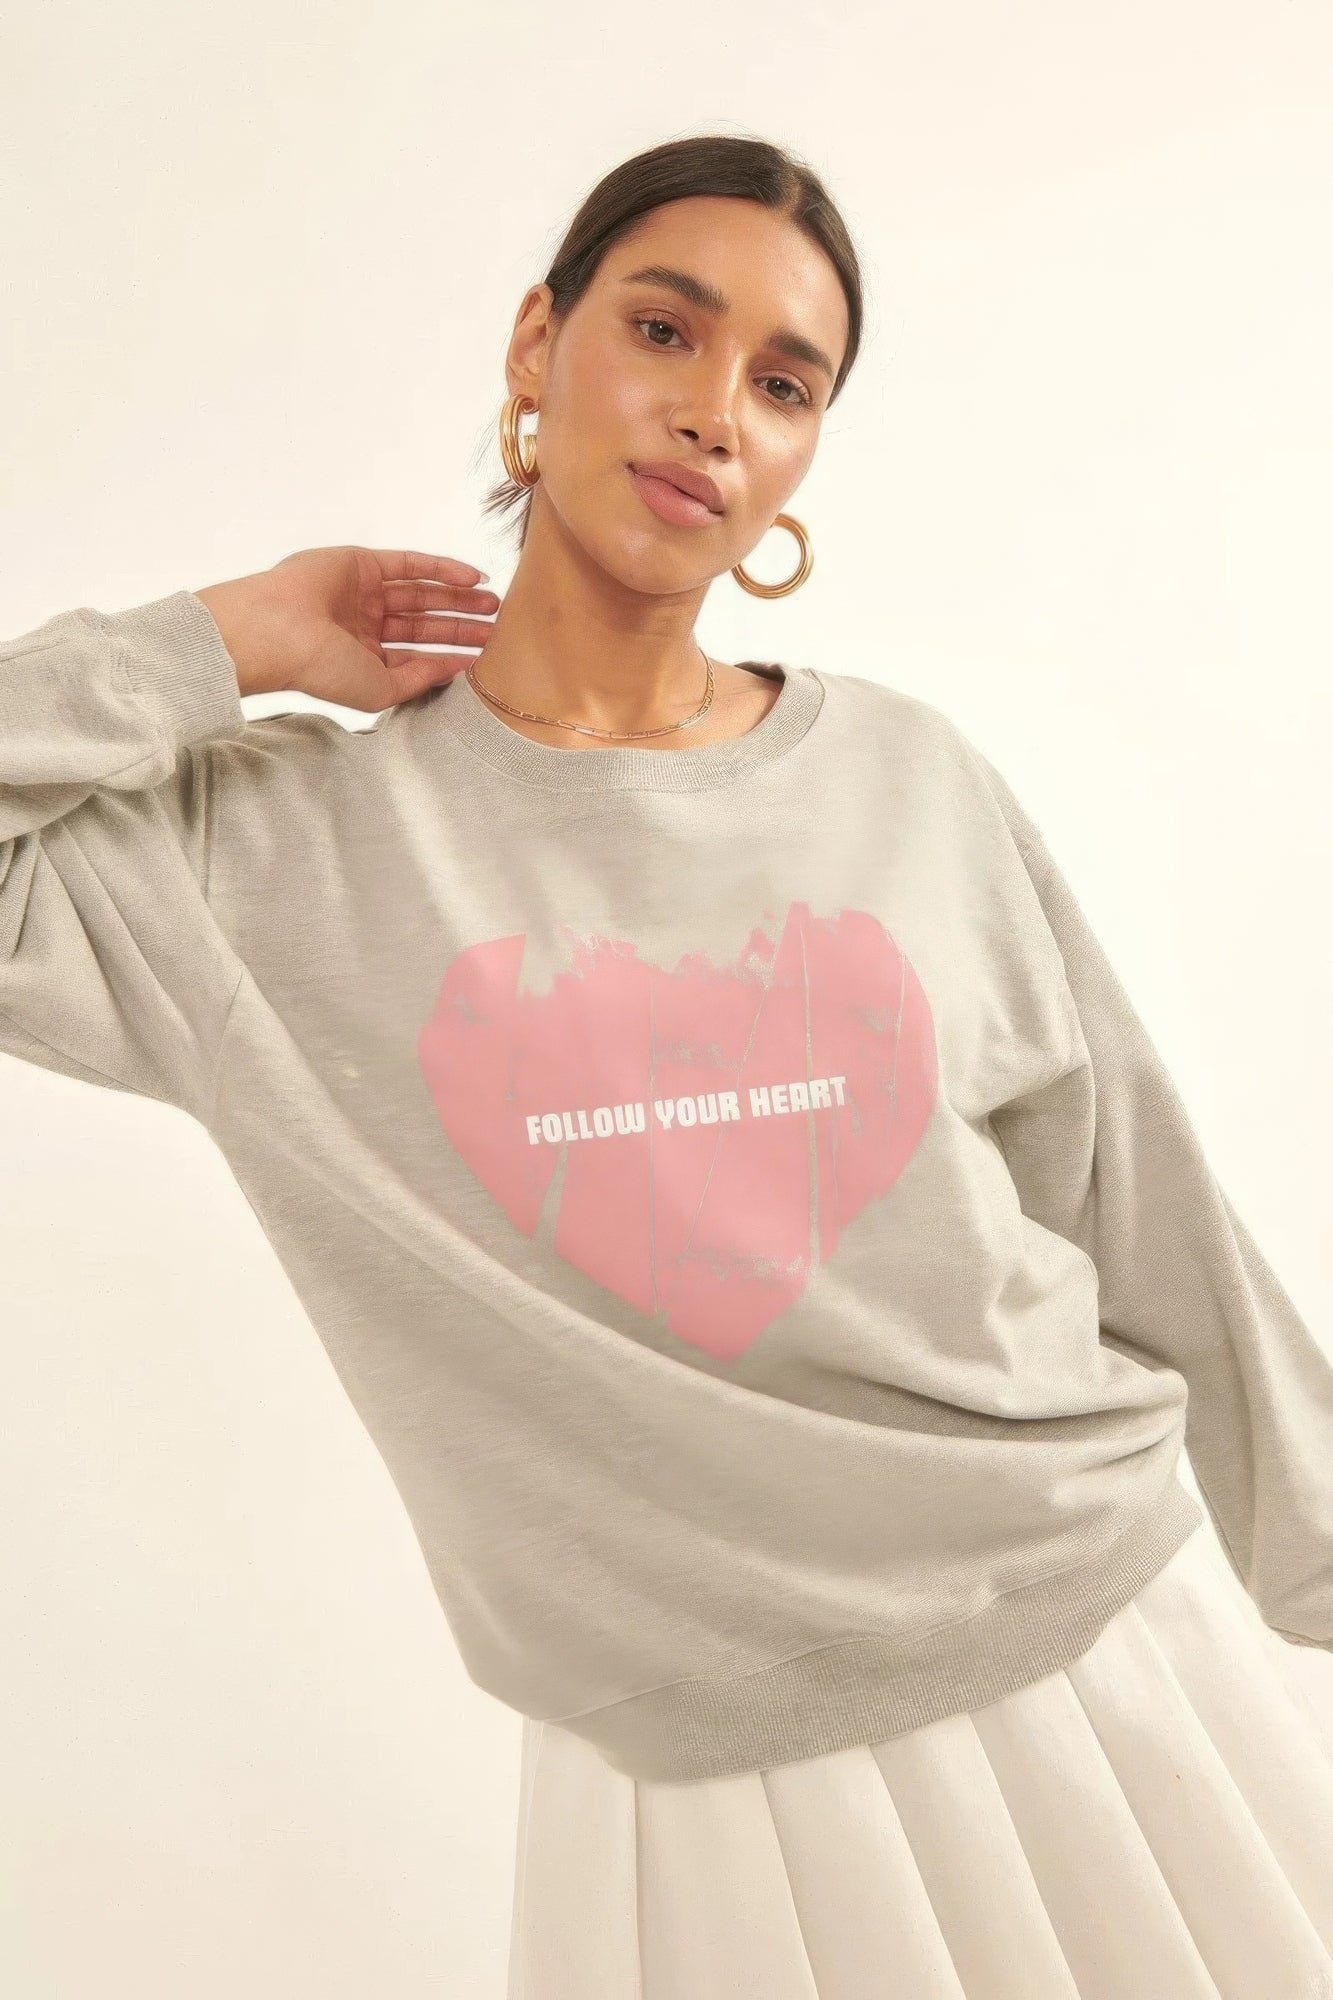 VINTAGE LOVER Vintage-style Heart Graphic Print French Terry Knit Sweatshirt